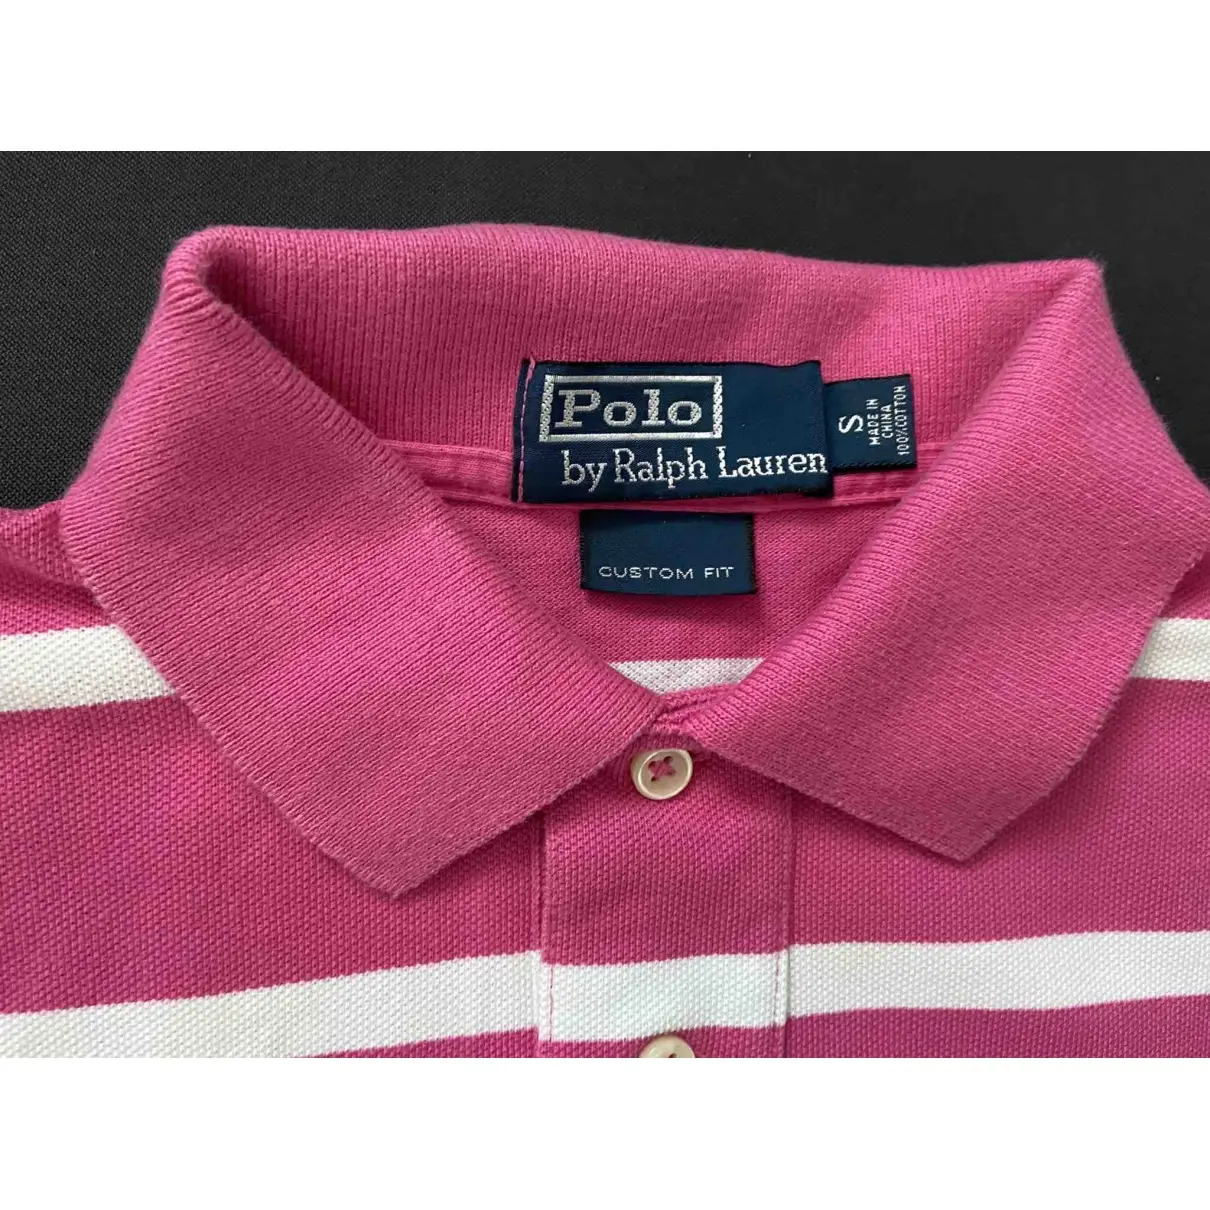 Buy Polo Ralph Lauren Polo Rugby manches courtes polo shirt online